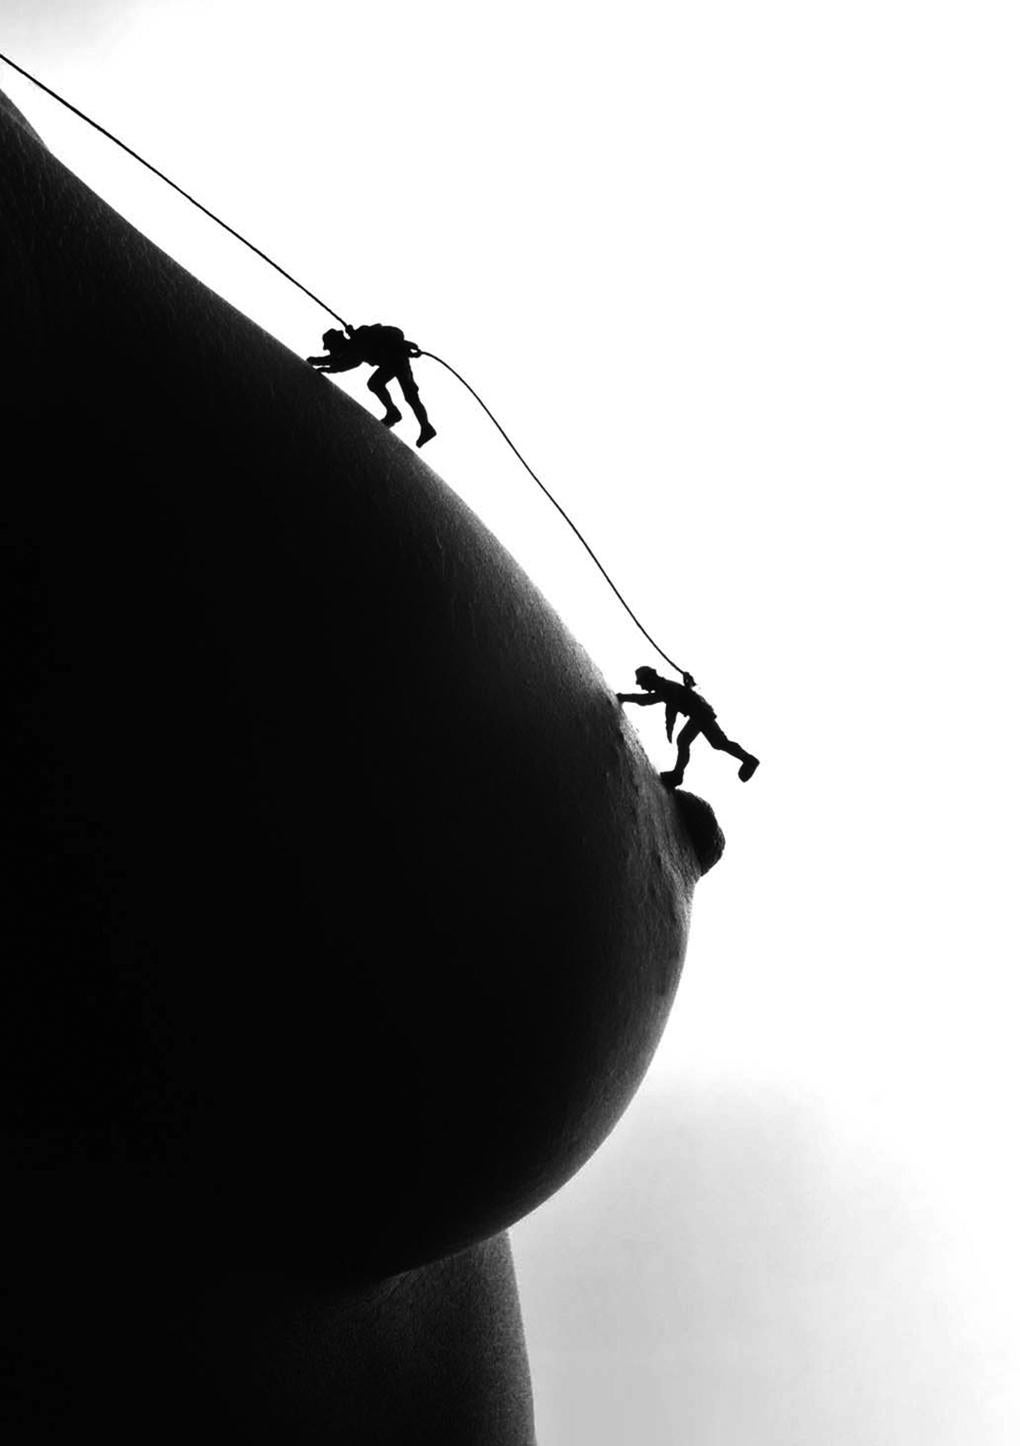 Mountain climbers - black and white photography  - Photograph by Allan I. Teger